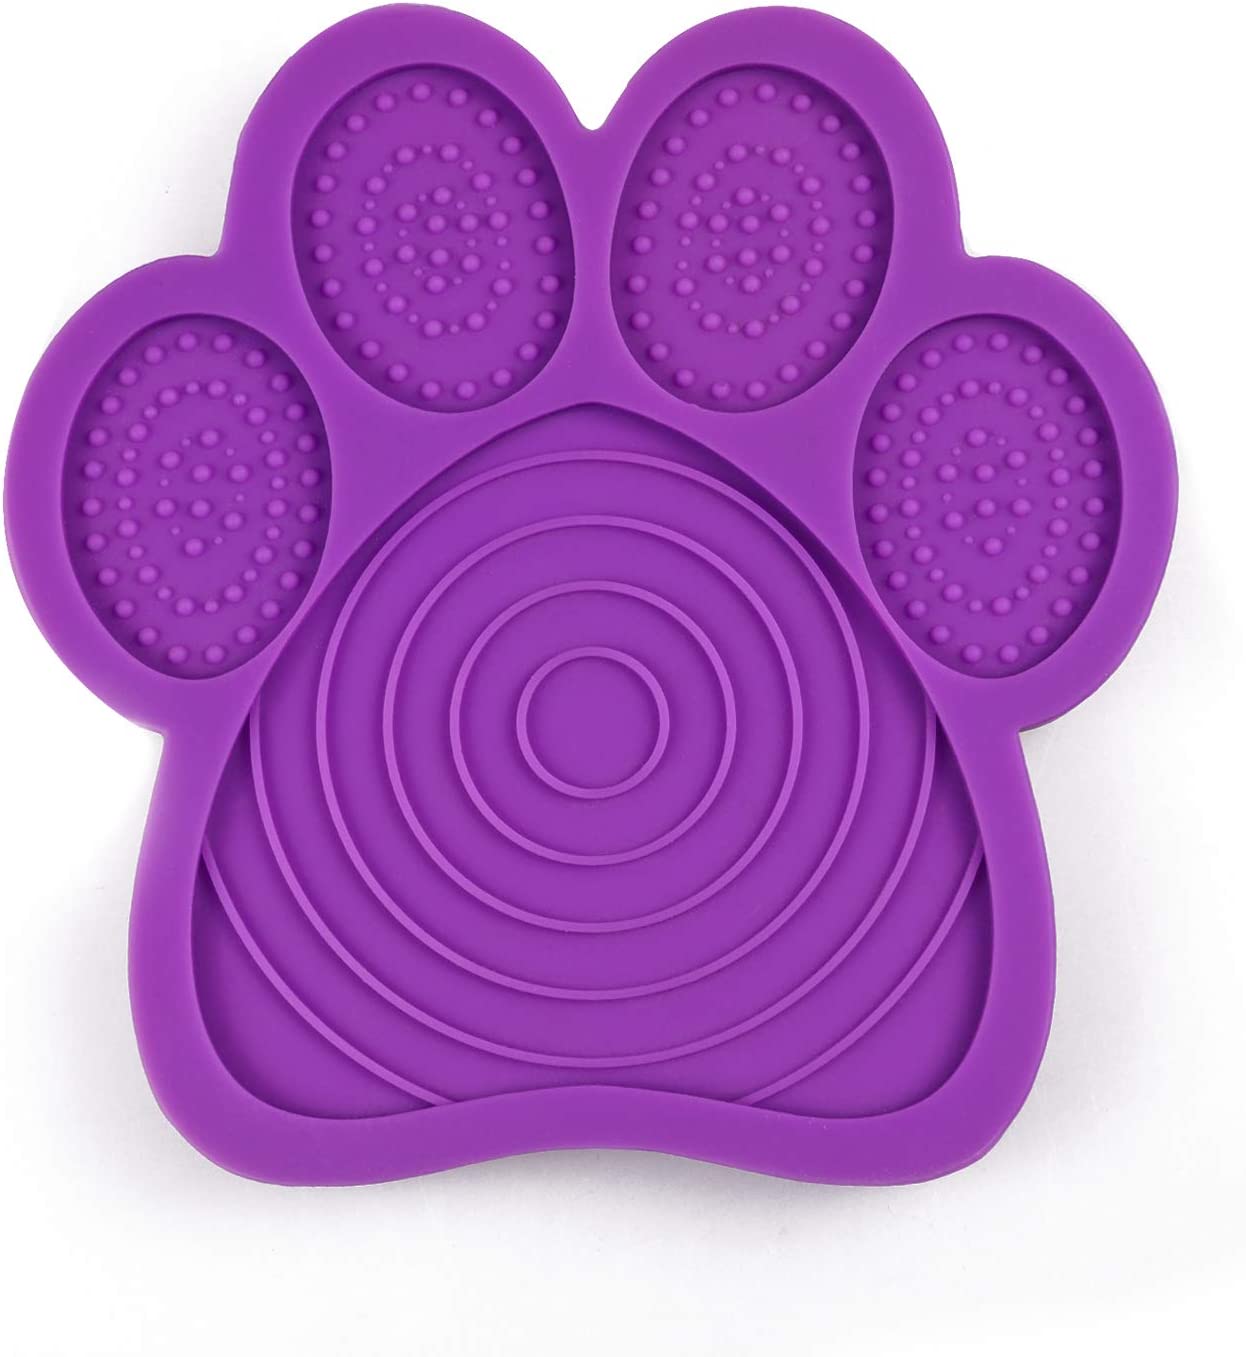 Weliu Lick Pad for Dog, Slow Treat Dispensing Mat Suctions To Wall for Pet Bathing, Grooming, and Dog Training Distraction Device To Make Bath Time Happy